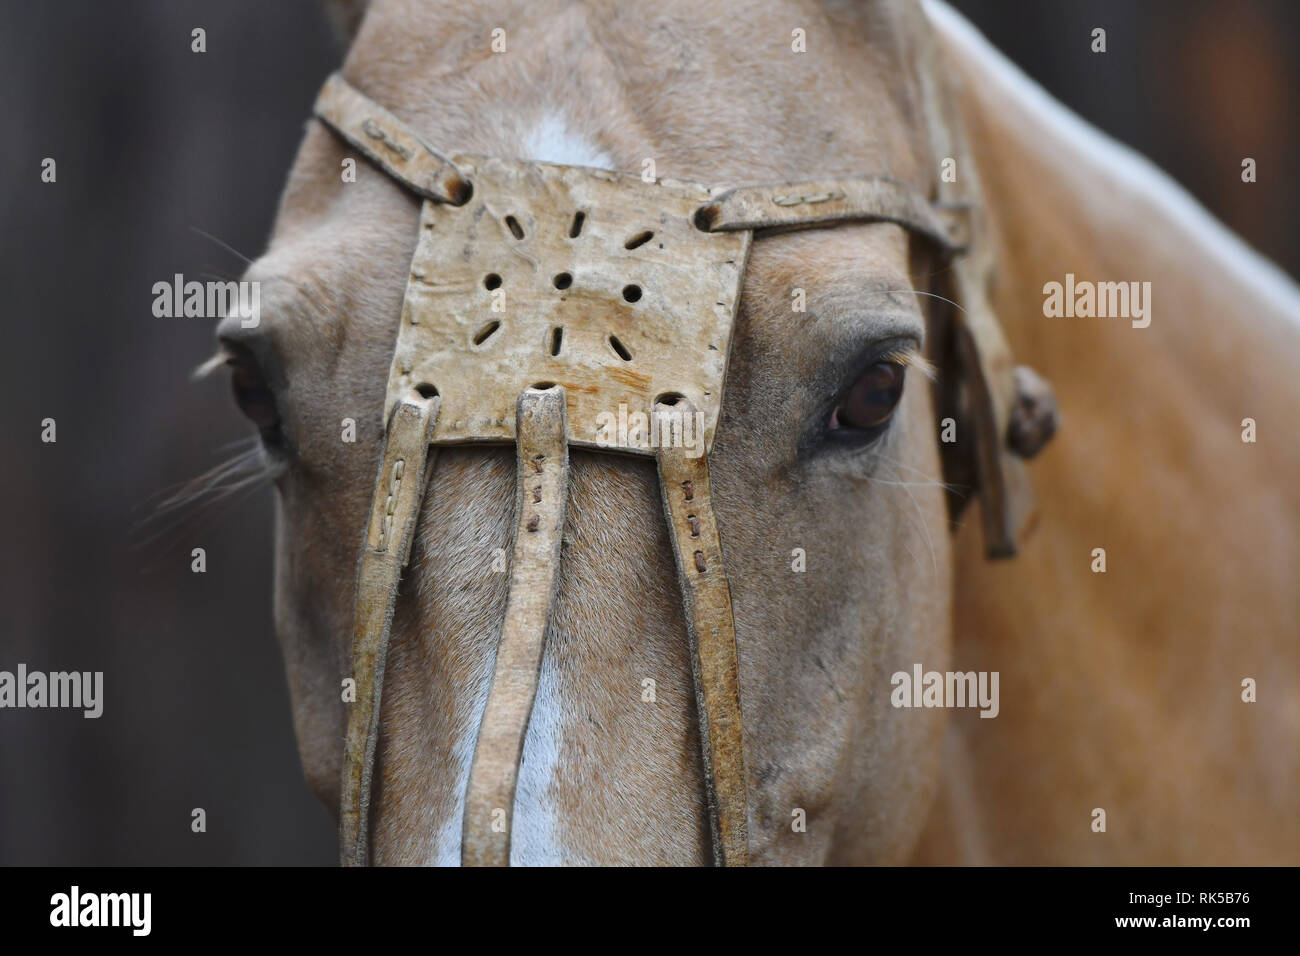 Close up of a horse's head in leather polo halter looking into the camera. Horizontal, front view, portrait. Stock Photo